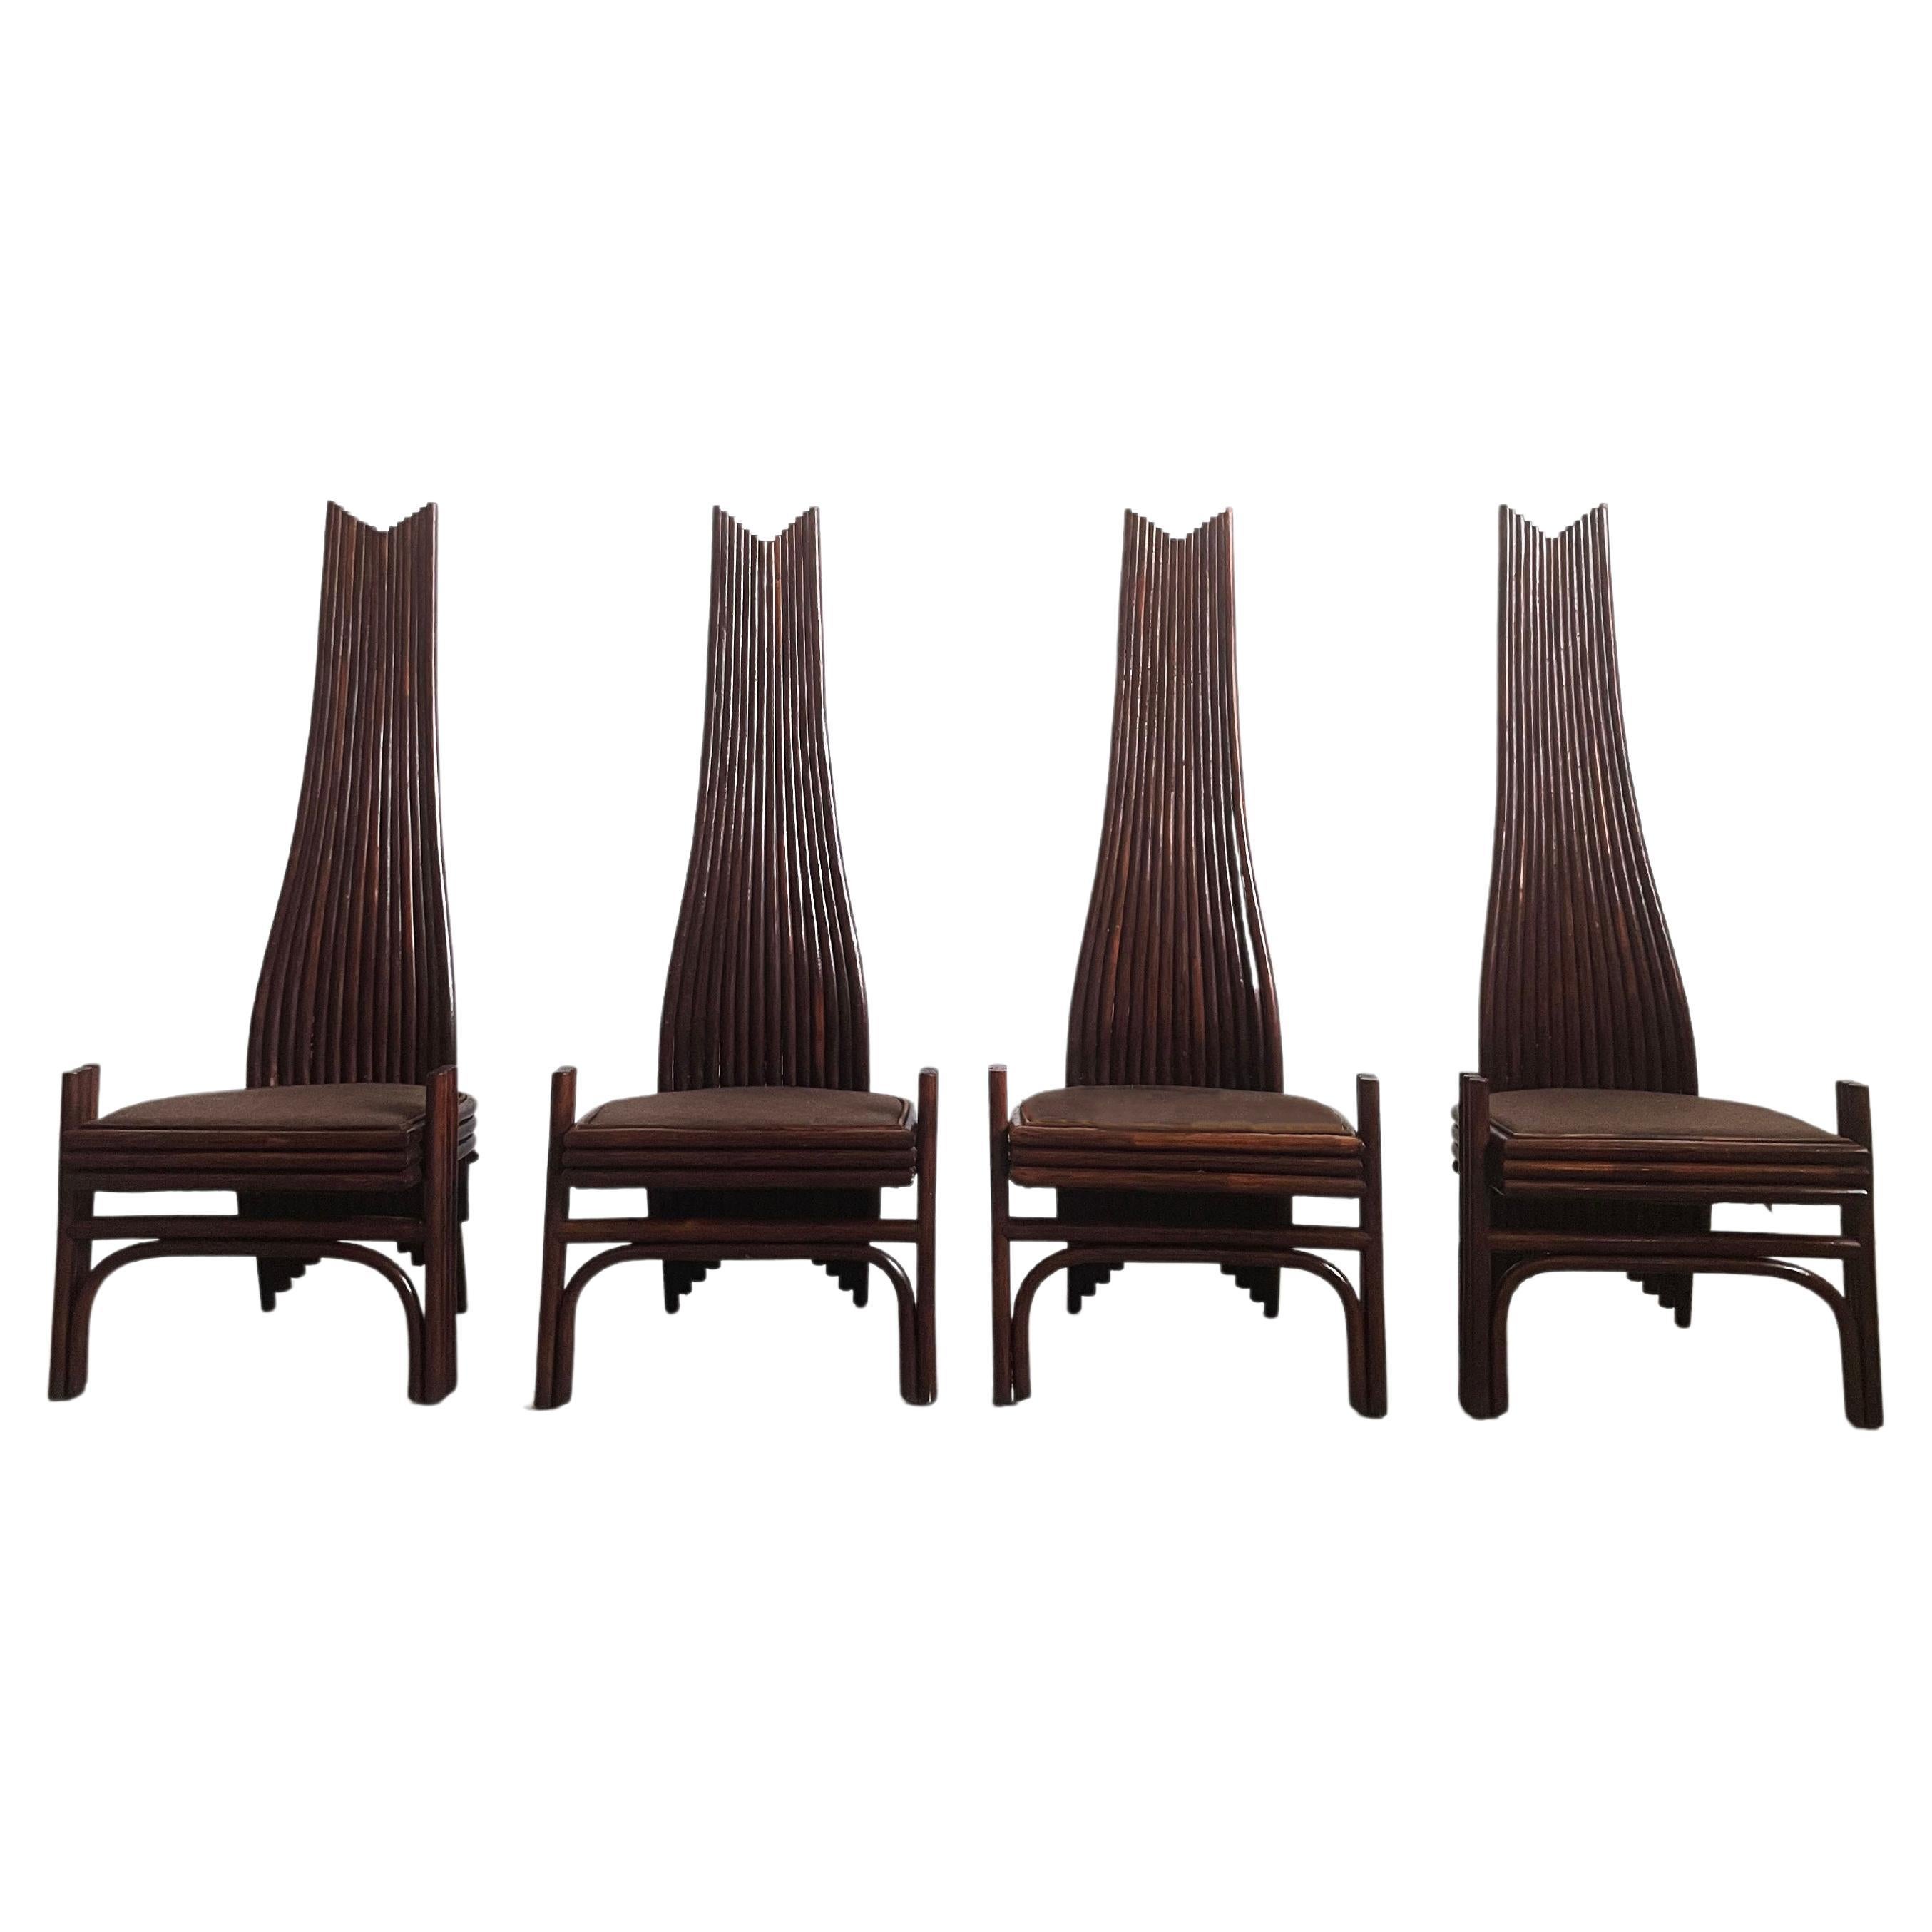 Set of 4 Bamboo High back Curved Dining Chairs by Mcguire, USA 1970s For Sale